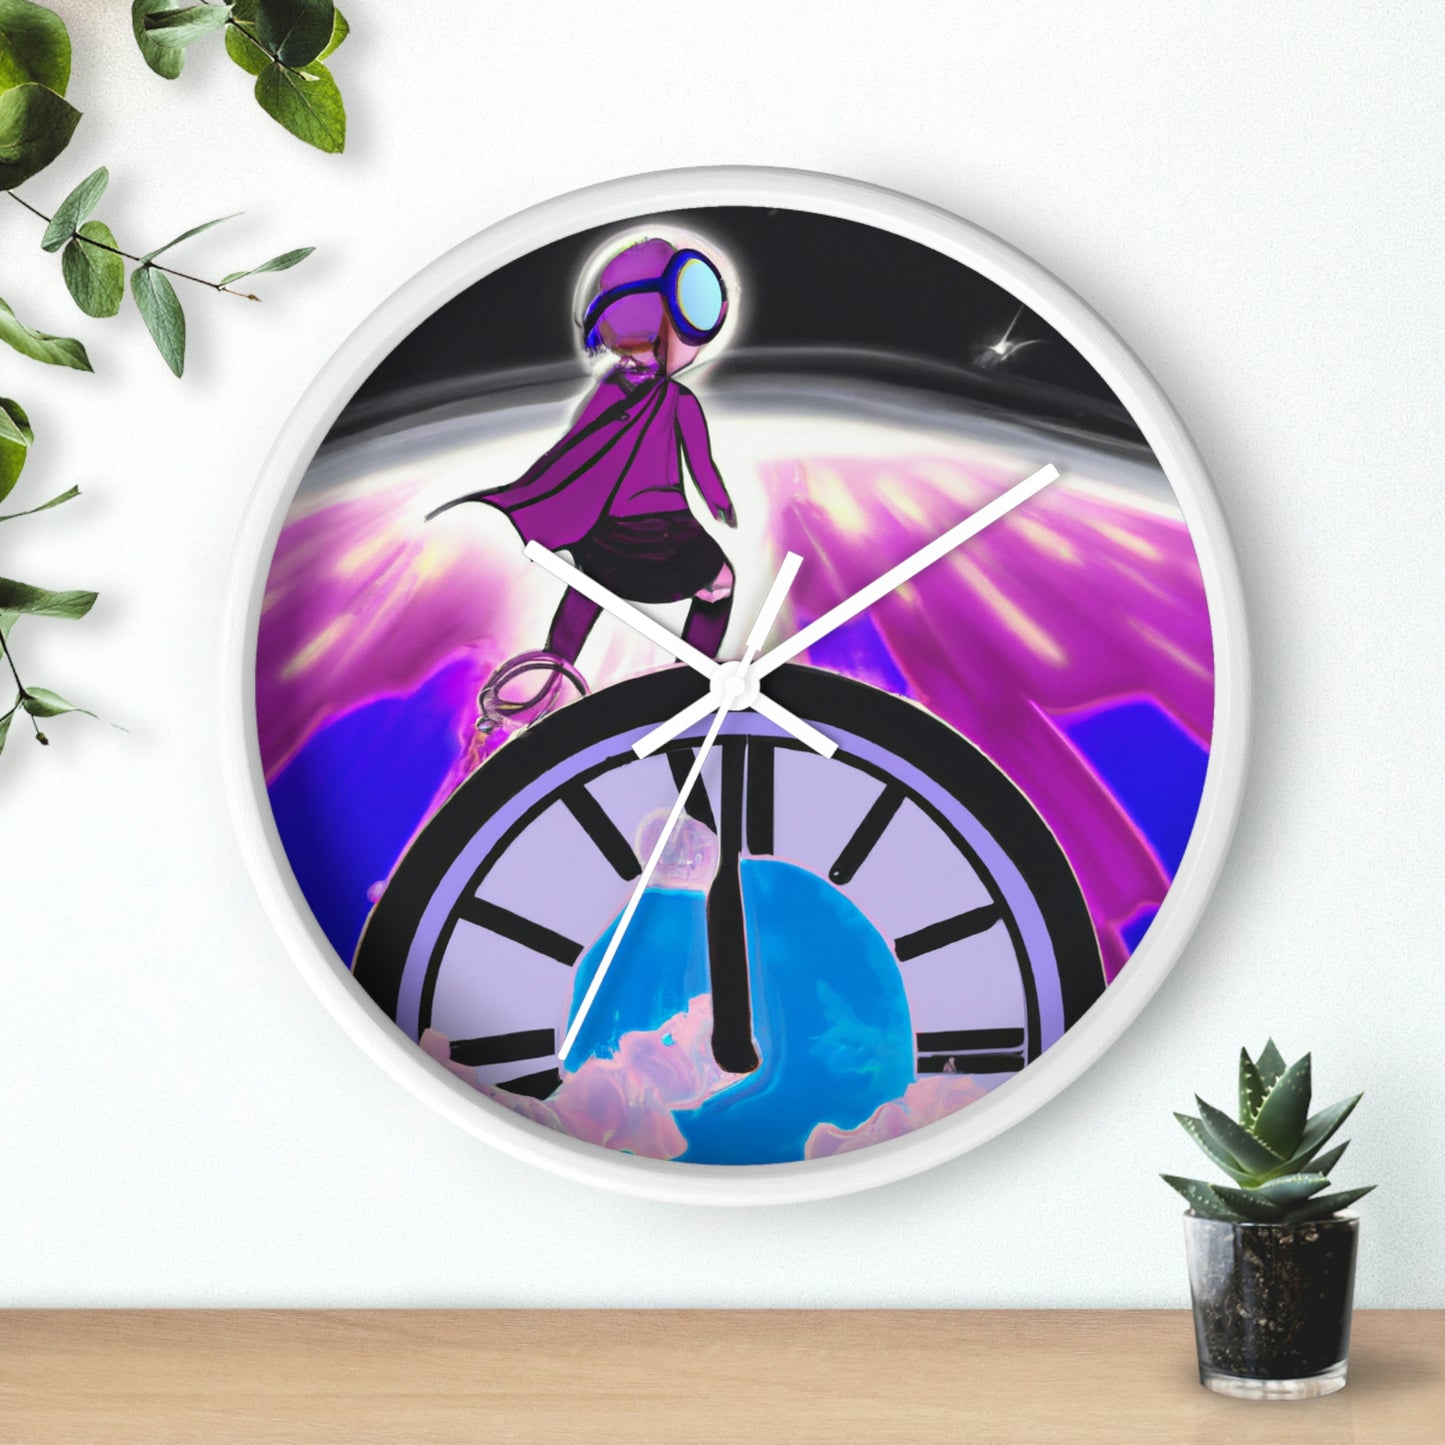 "Time-Travelers to the Rescue" - The Alien Wall Clock